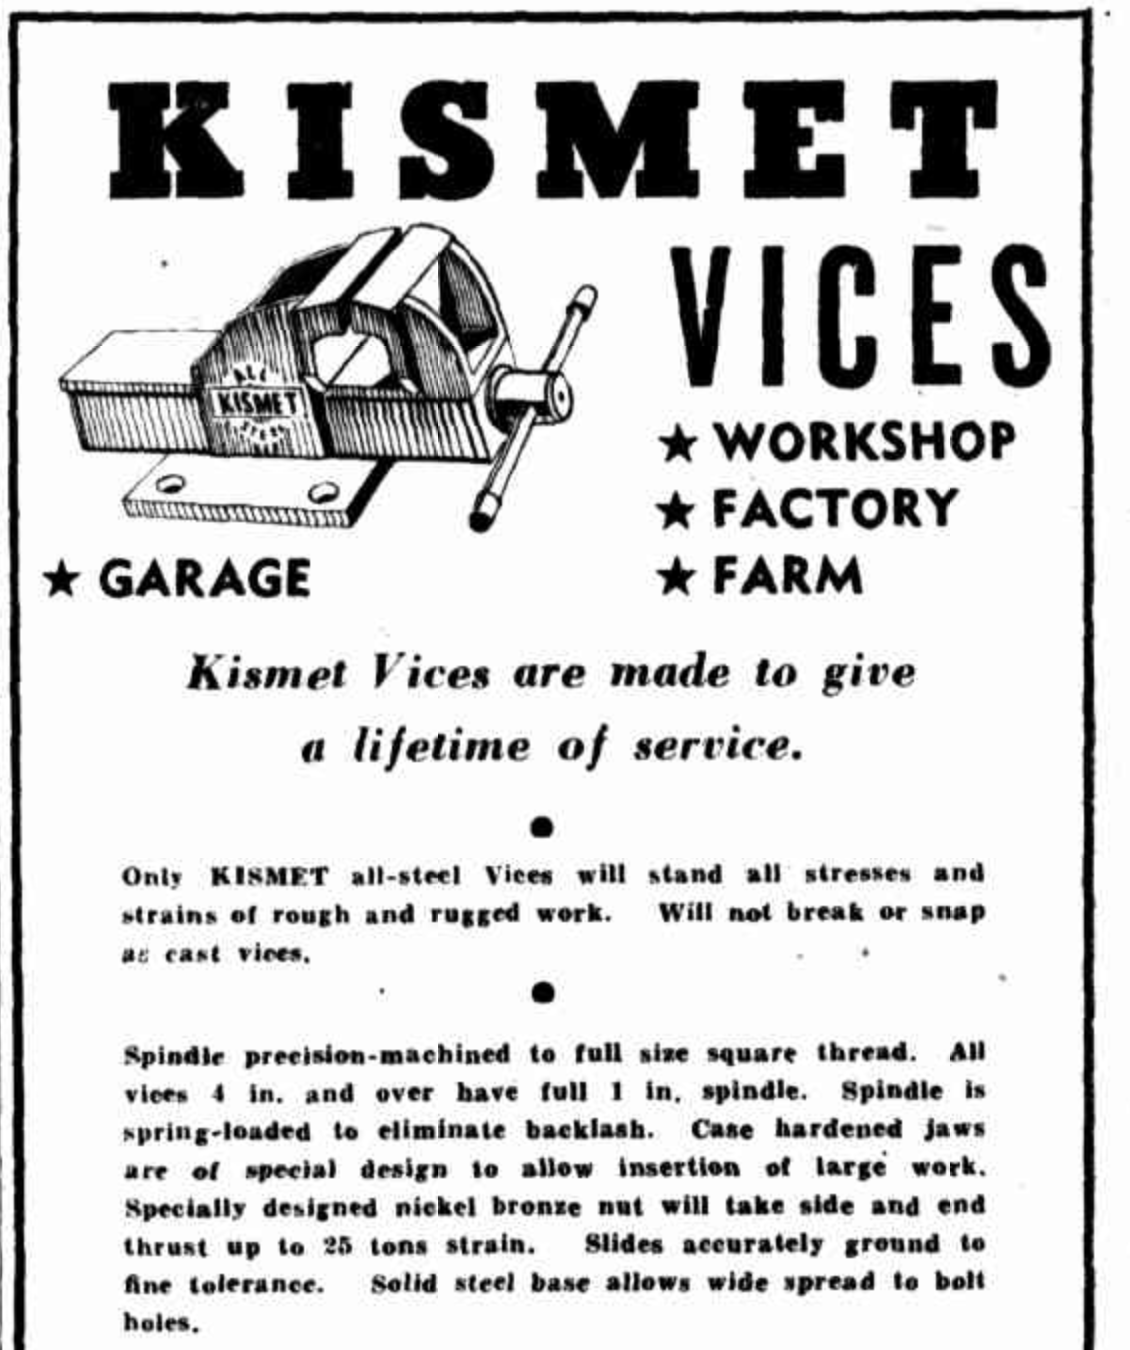 Here is an advertisment showing a Kismet vice from 1948